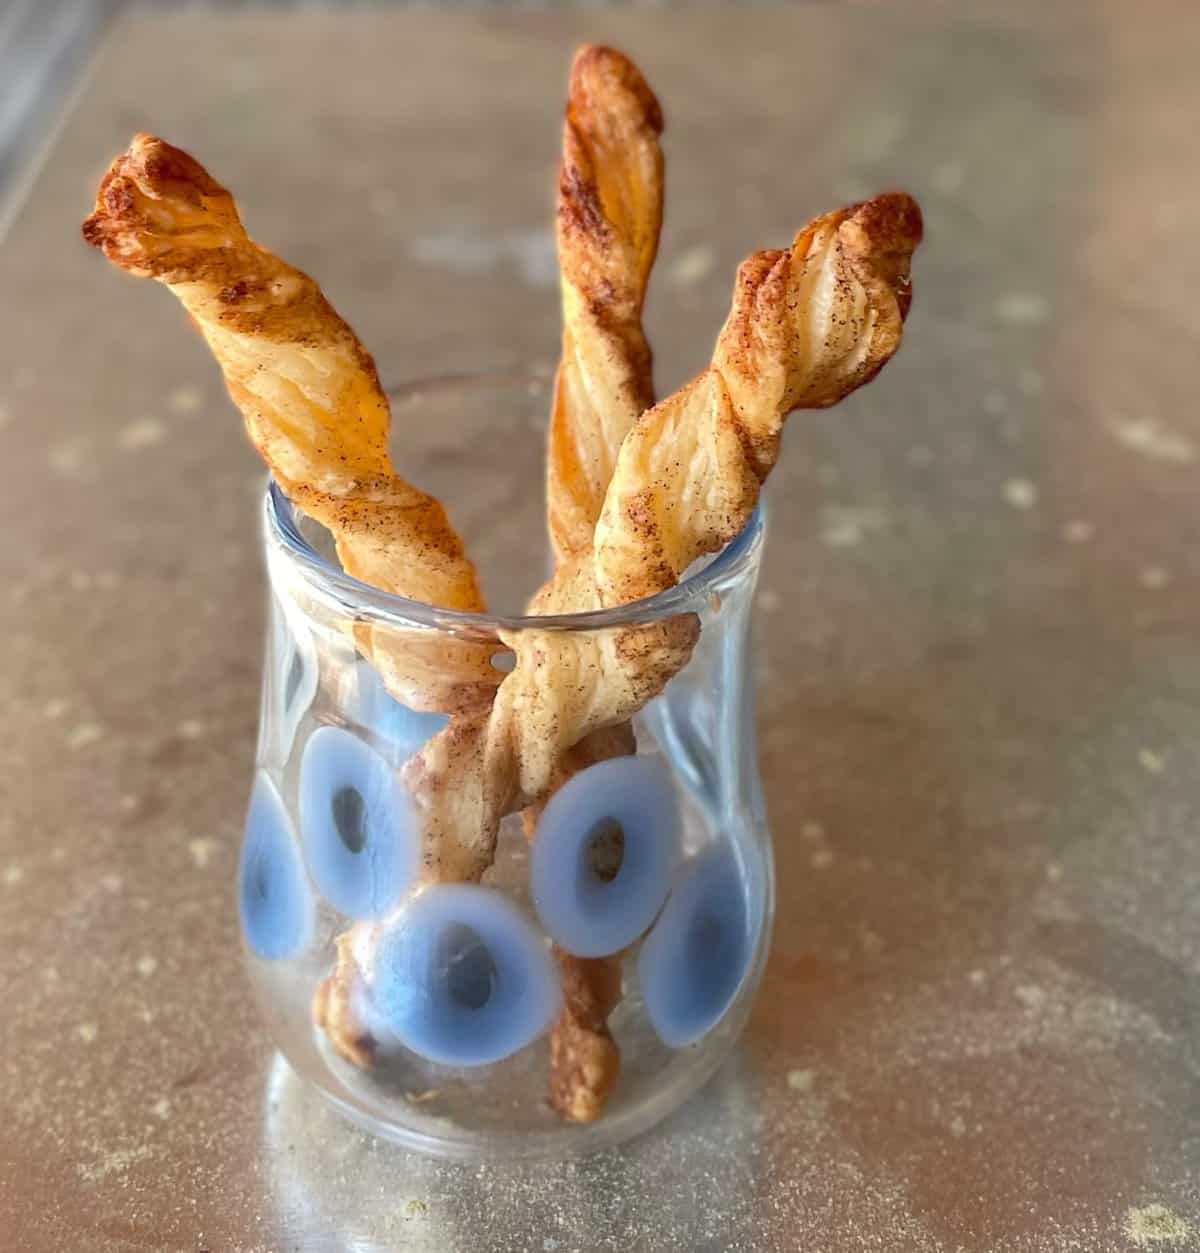 three puff pastry cinnamon twists standing upright in a glass.